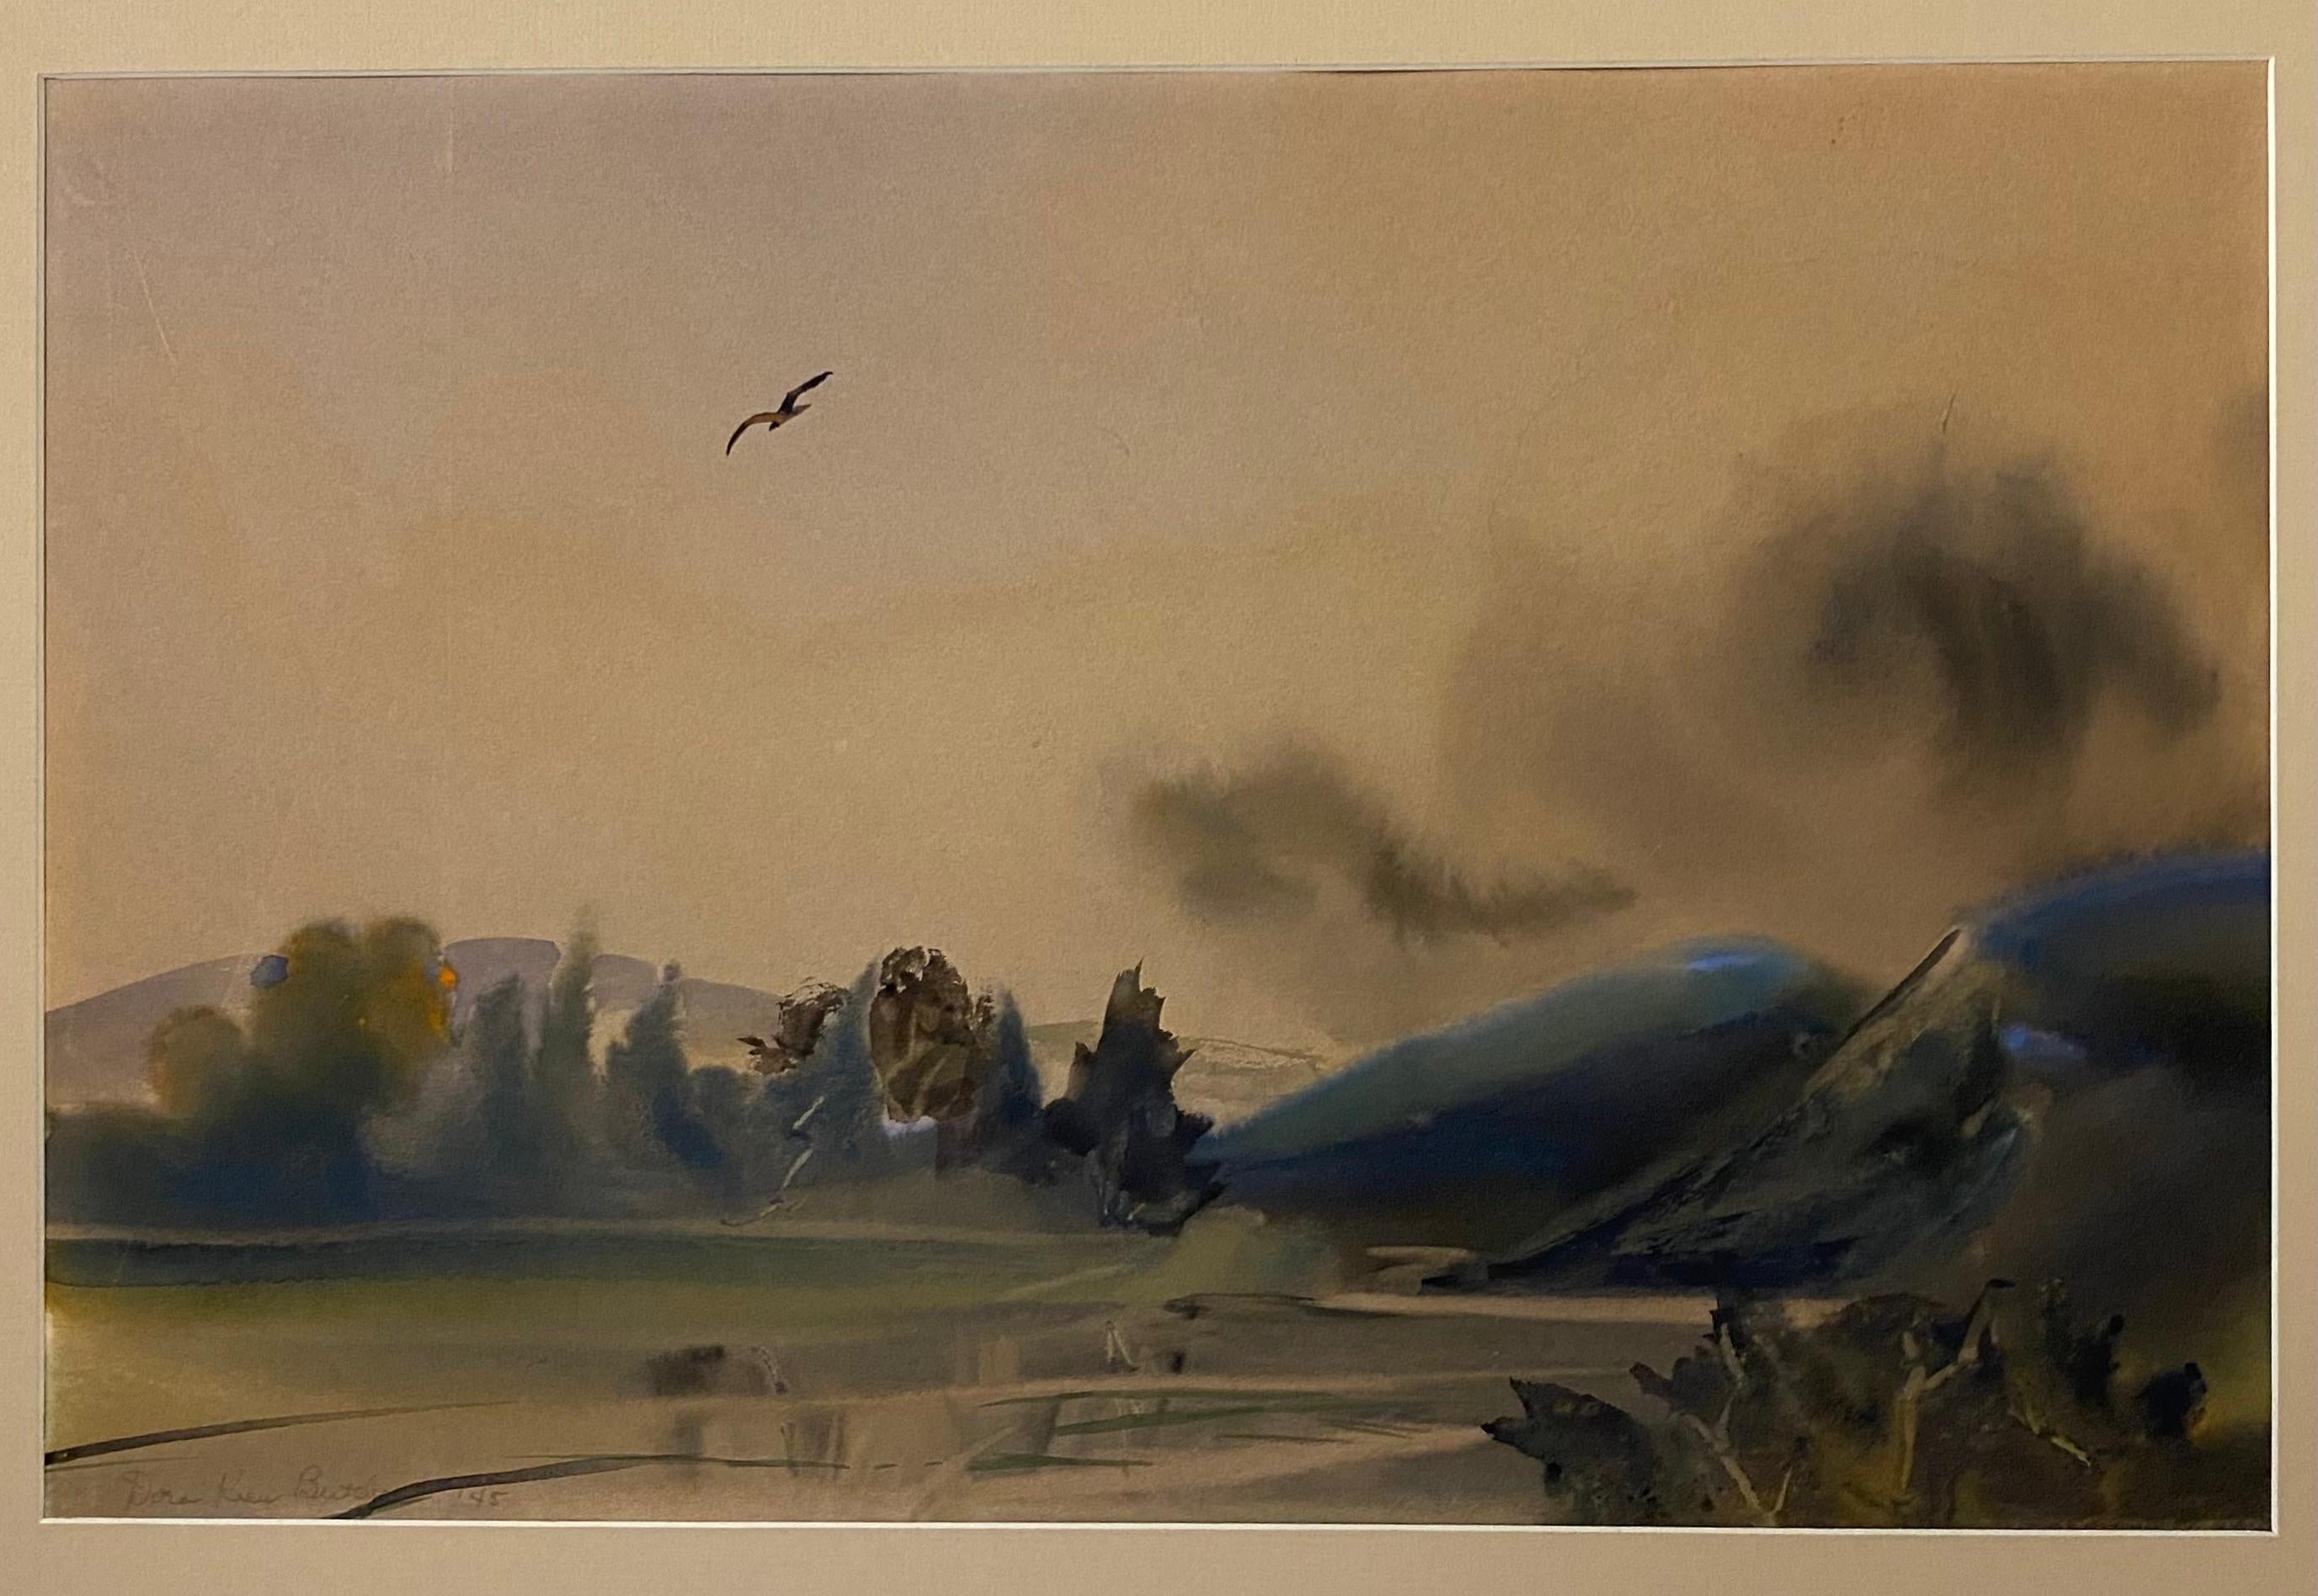 A very well executed original painting by Dora Keen Butcher (American 1905 - 1982). This watercolor landscape painting. The painting is clearly artist signed and dated in pencil in the lower left corner. It is matted and inscribed in pencil on the